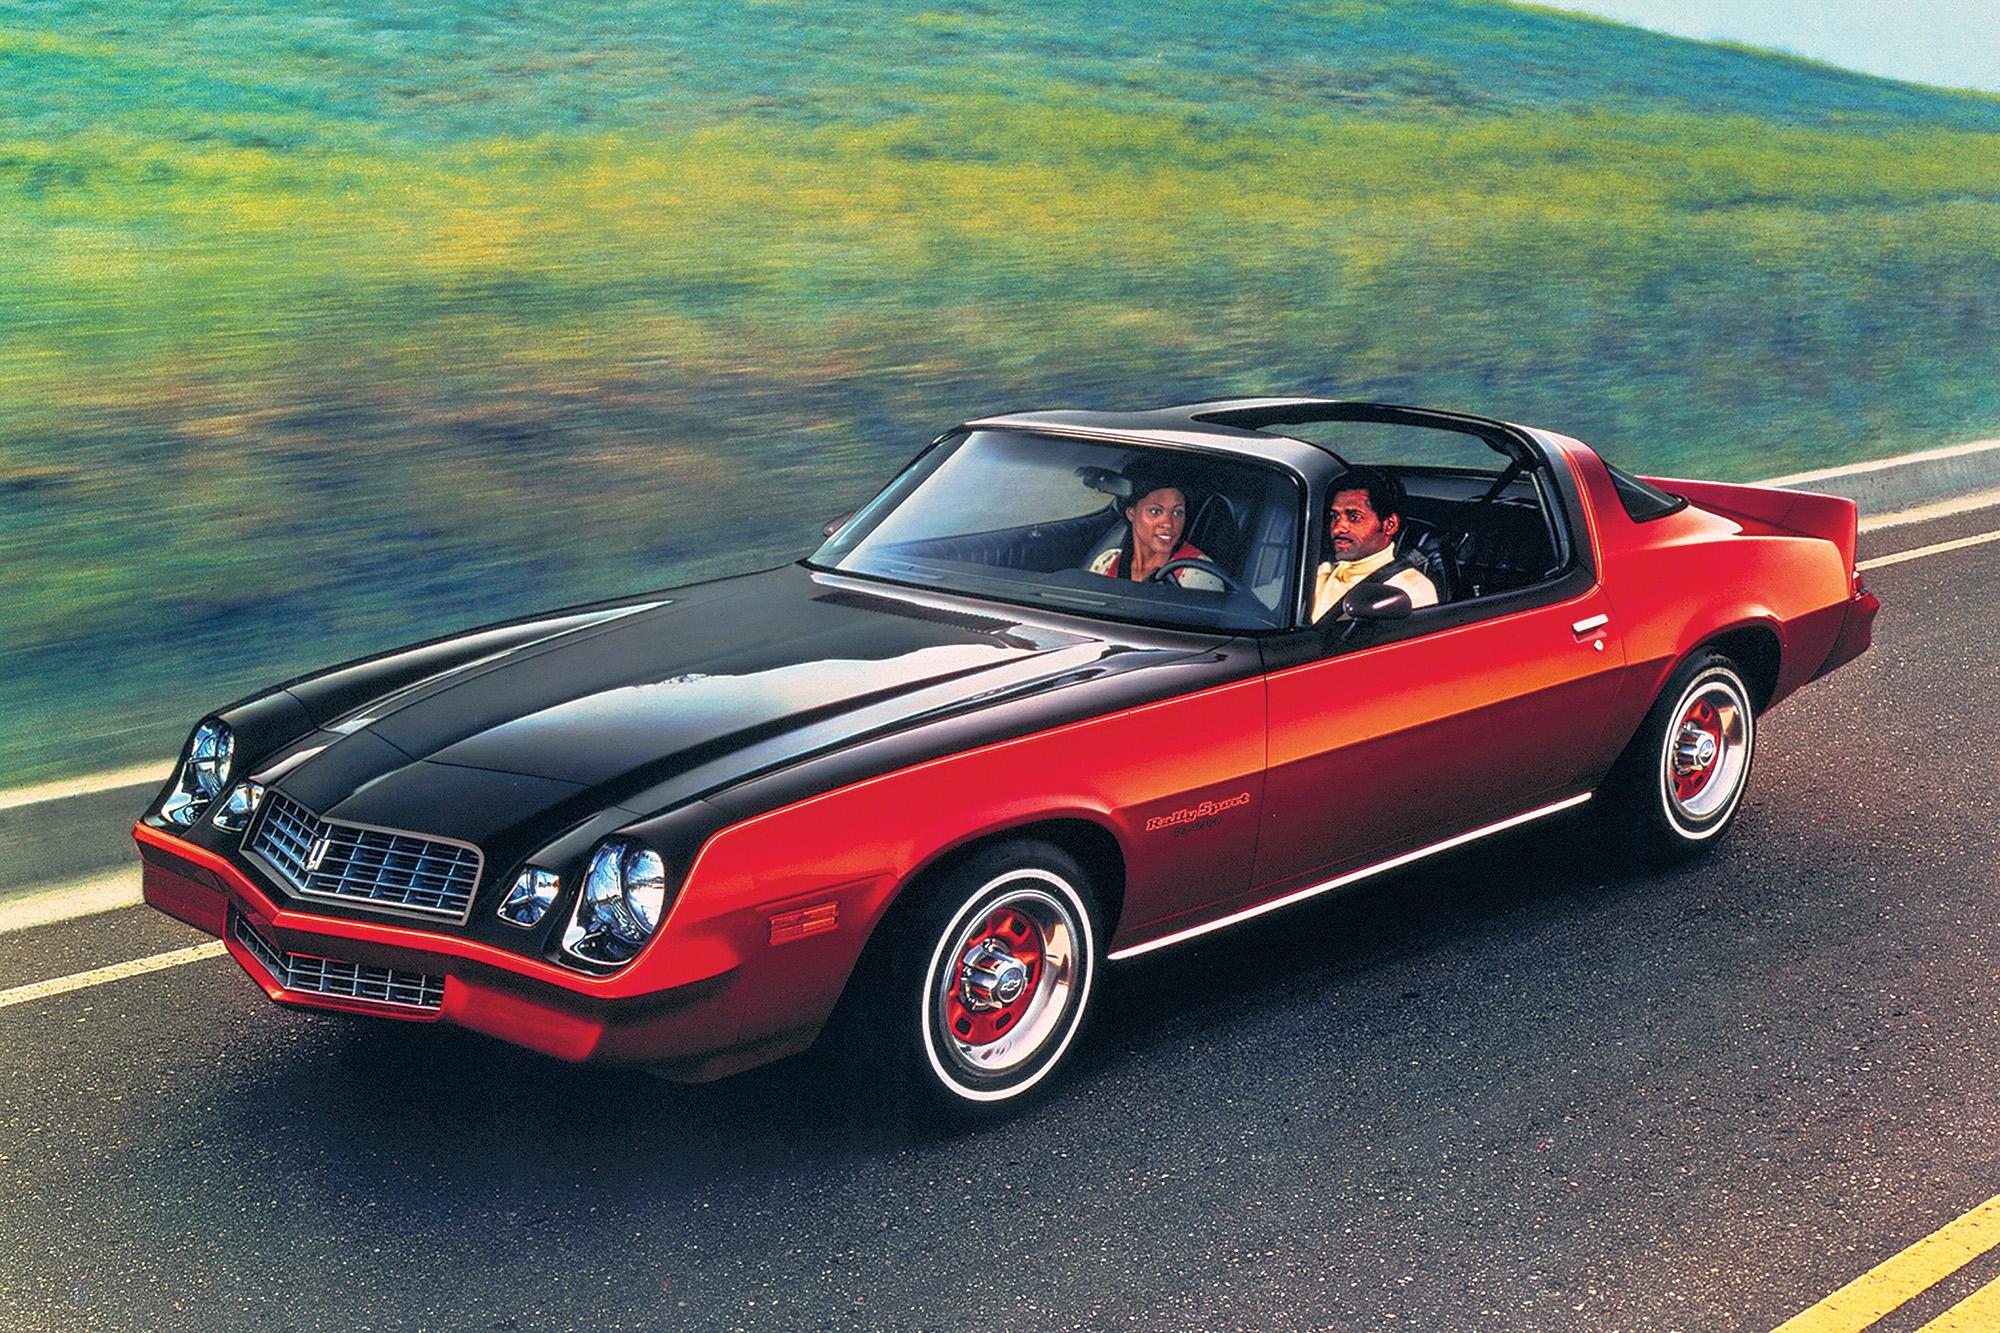 What to look for when buying a late second-generation Chevrolet Camaro